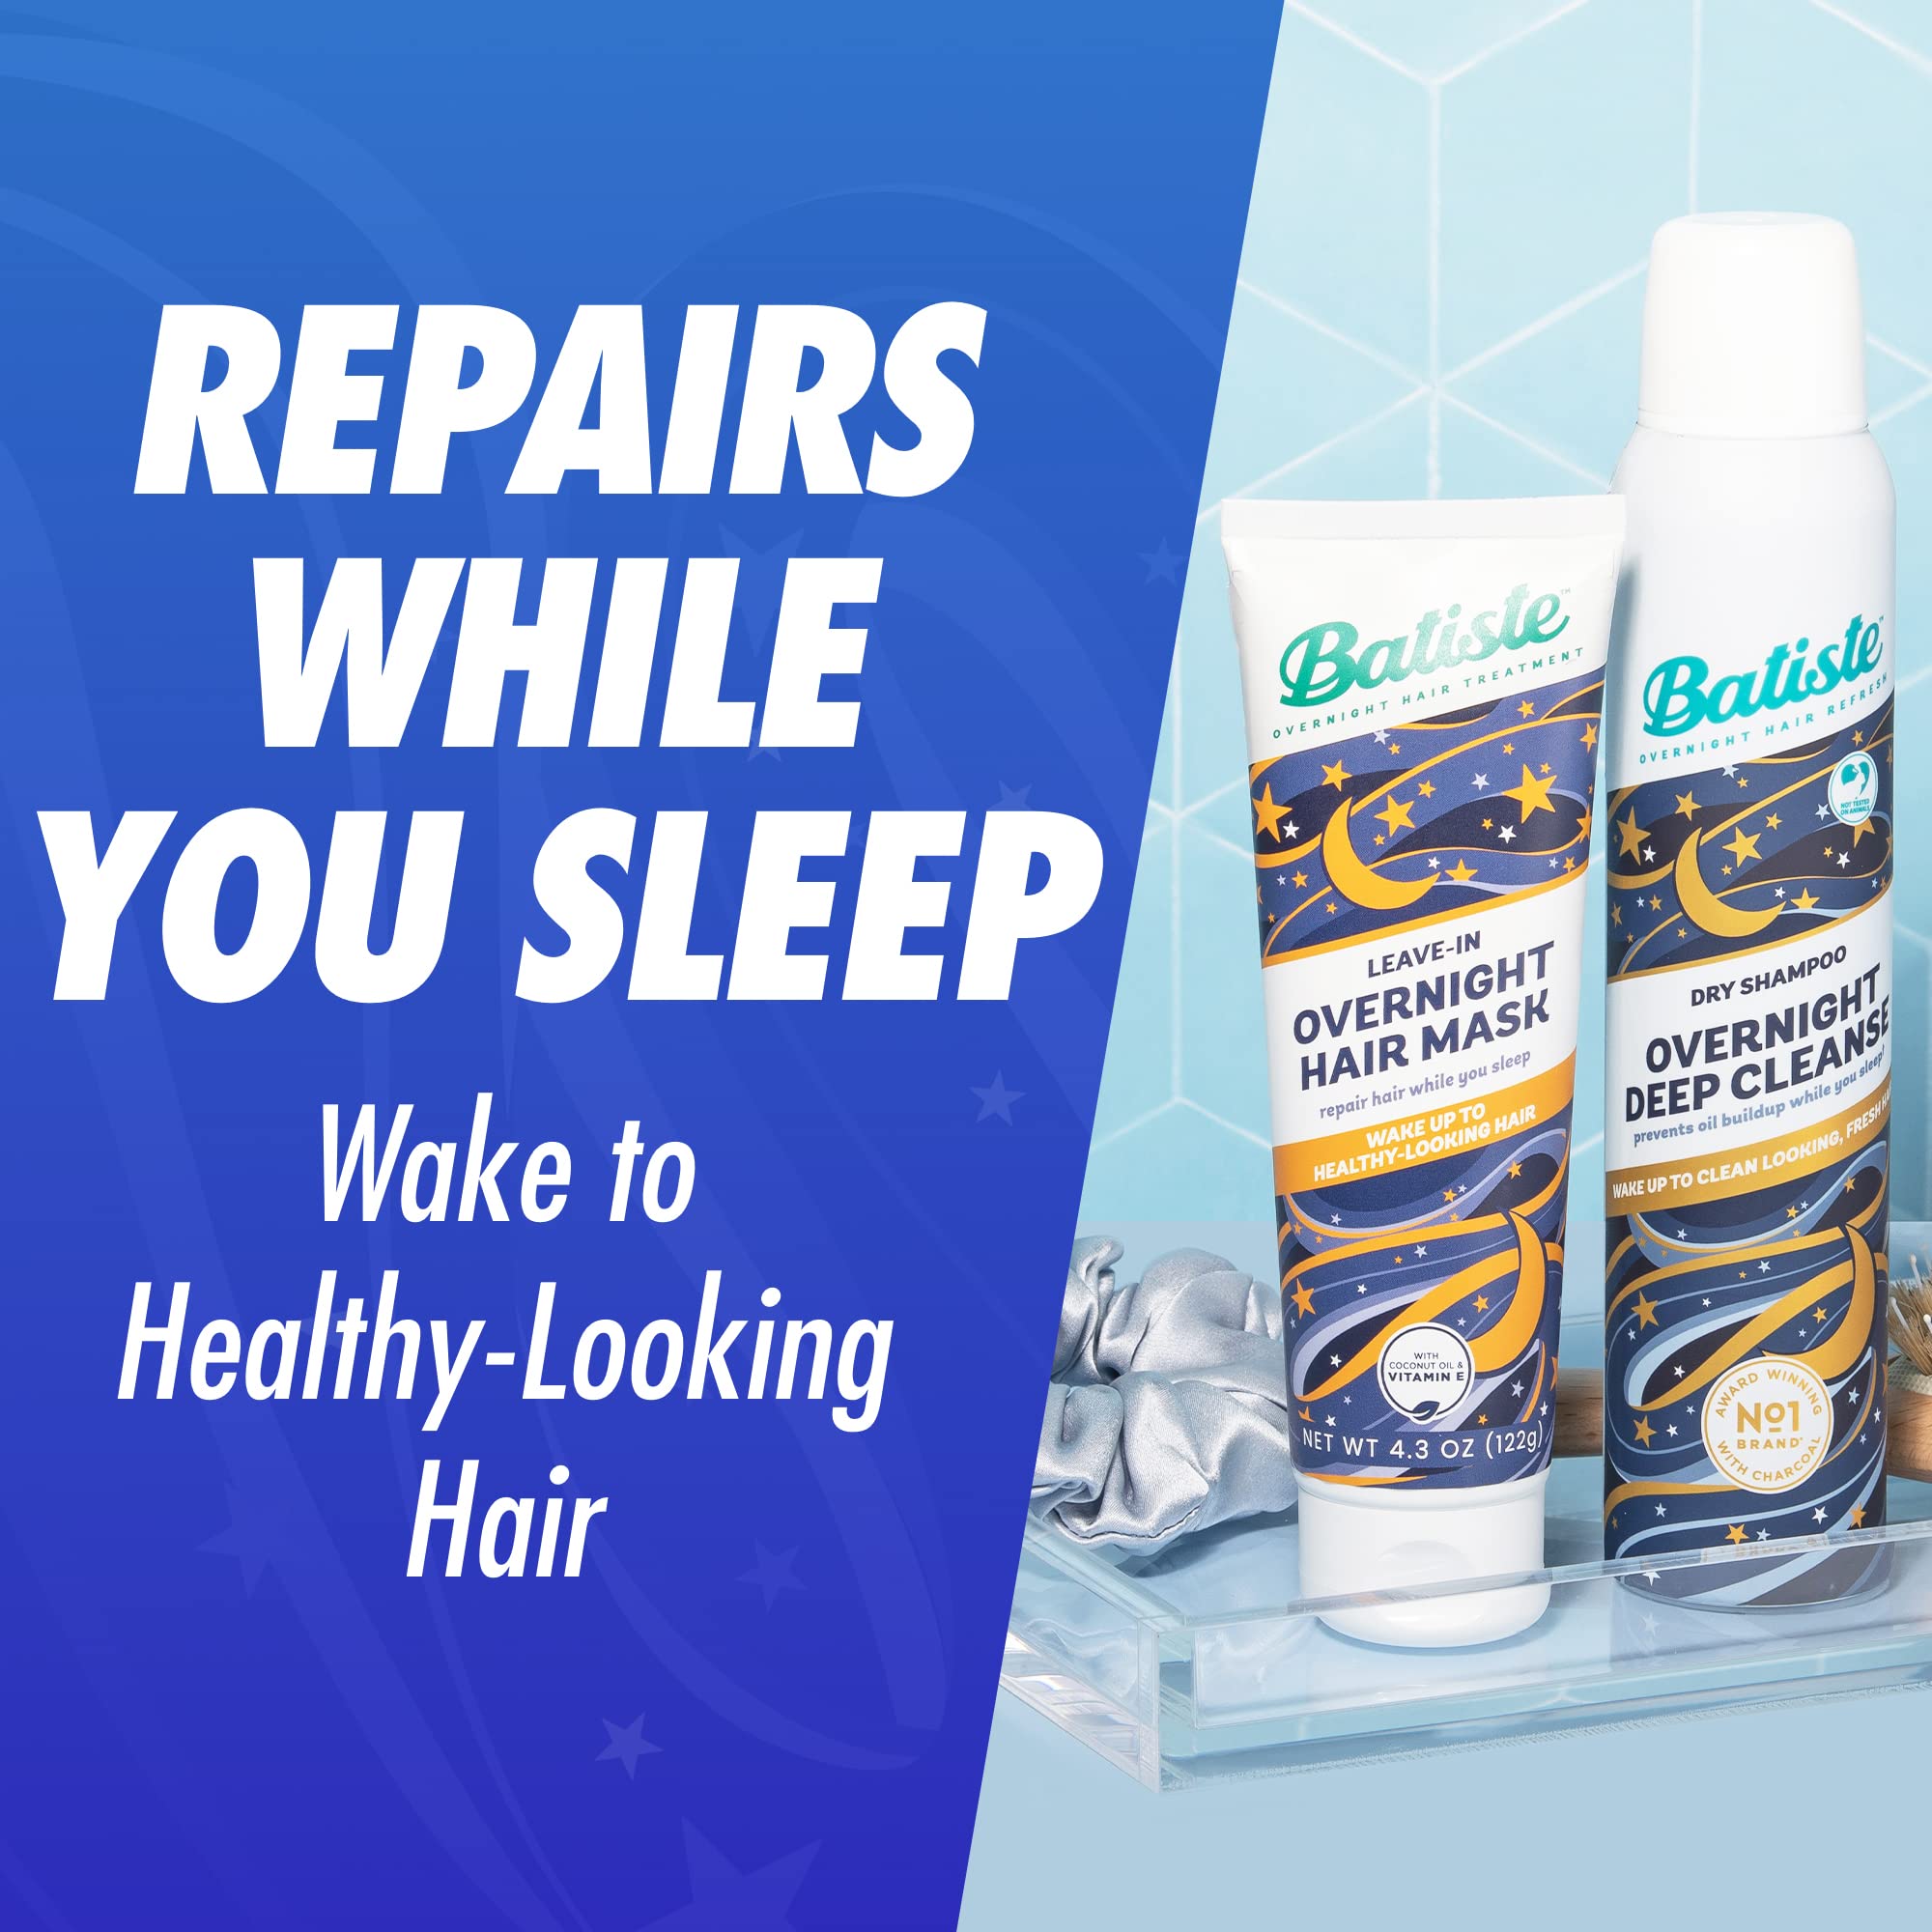 Batiste Overnight Deep Conditioning Leave-In Hair Mask, Repair Hair, Hair Conditioner Nourish Dry Hair Overnight, Infused with vitamin E for Enhancing Haircare, 4.3oz.